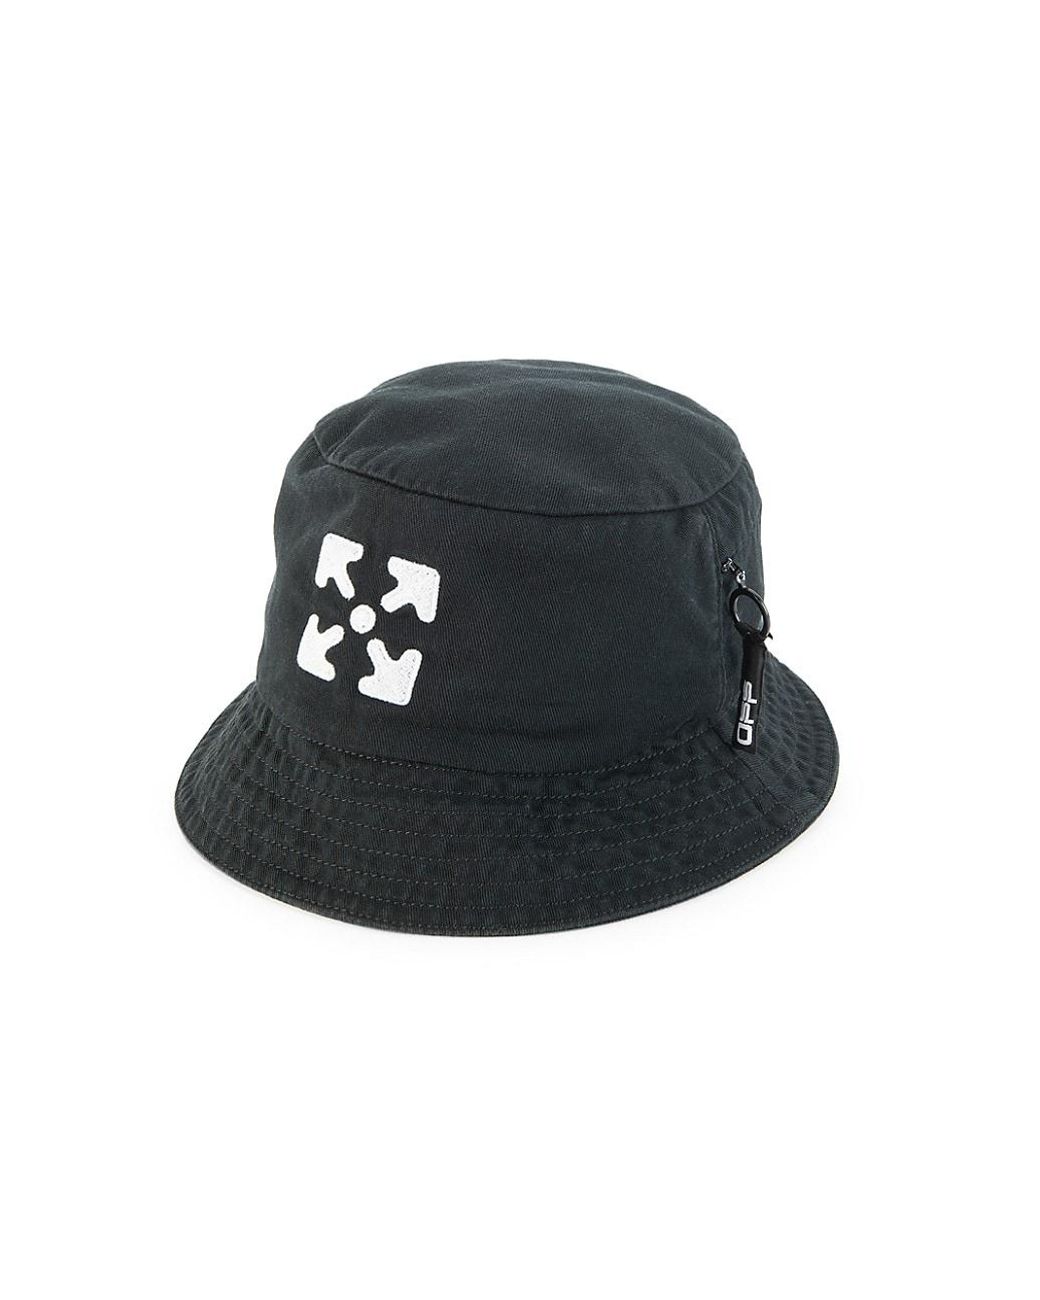 Save 56% Black Mens Accessories Hats for Men Off-White c/o Virgil Abloh Cotton Helvetica Bucket Hat in Black White 